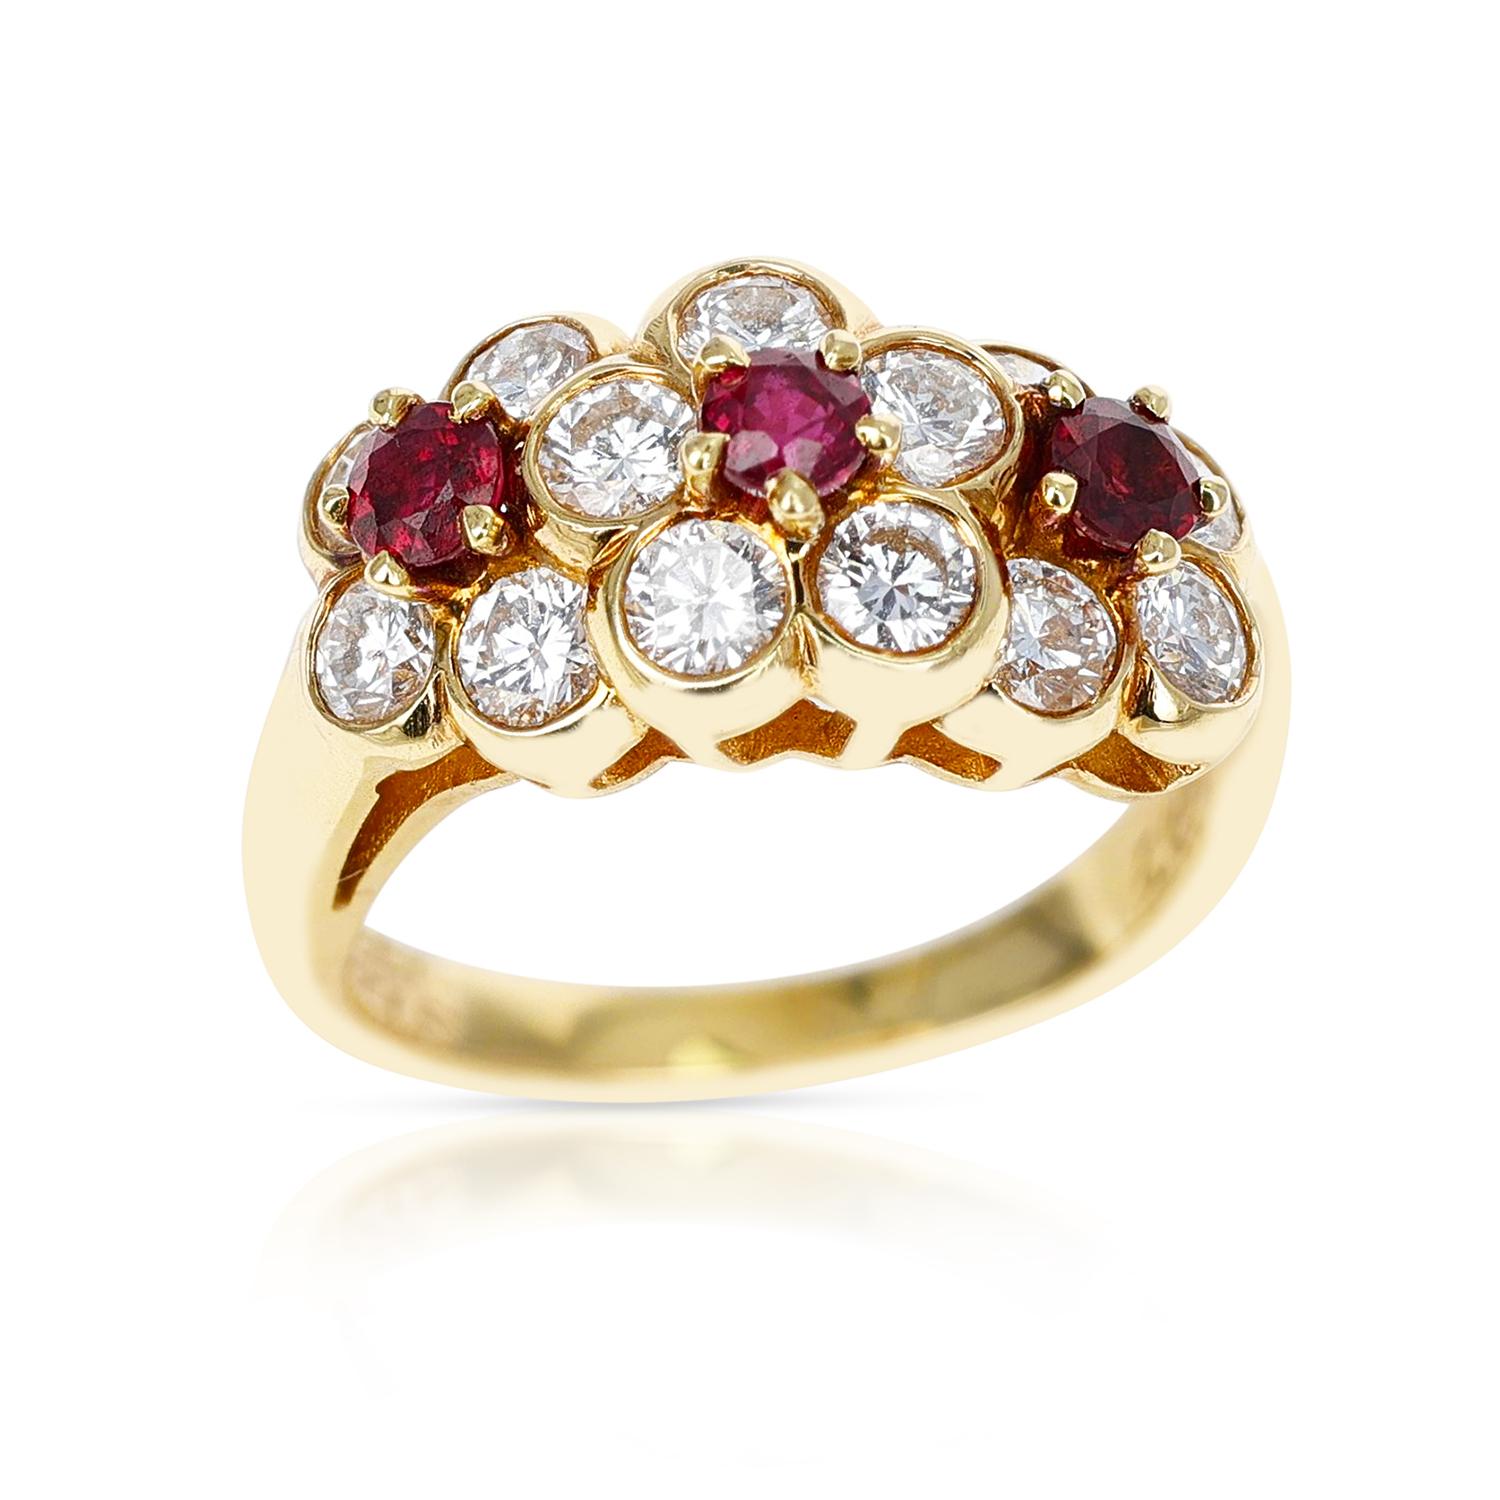 Round Cut Van Cleef & Arpels Tri-Floral Ruby and Diamond Ring, 18k Yellow Gold